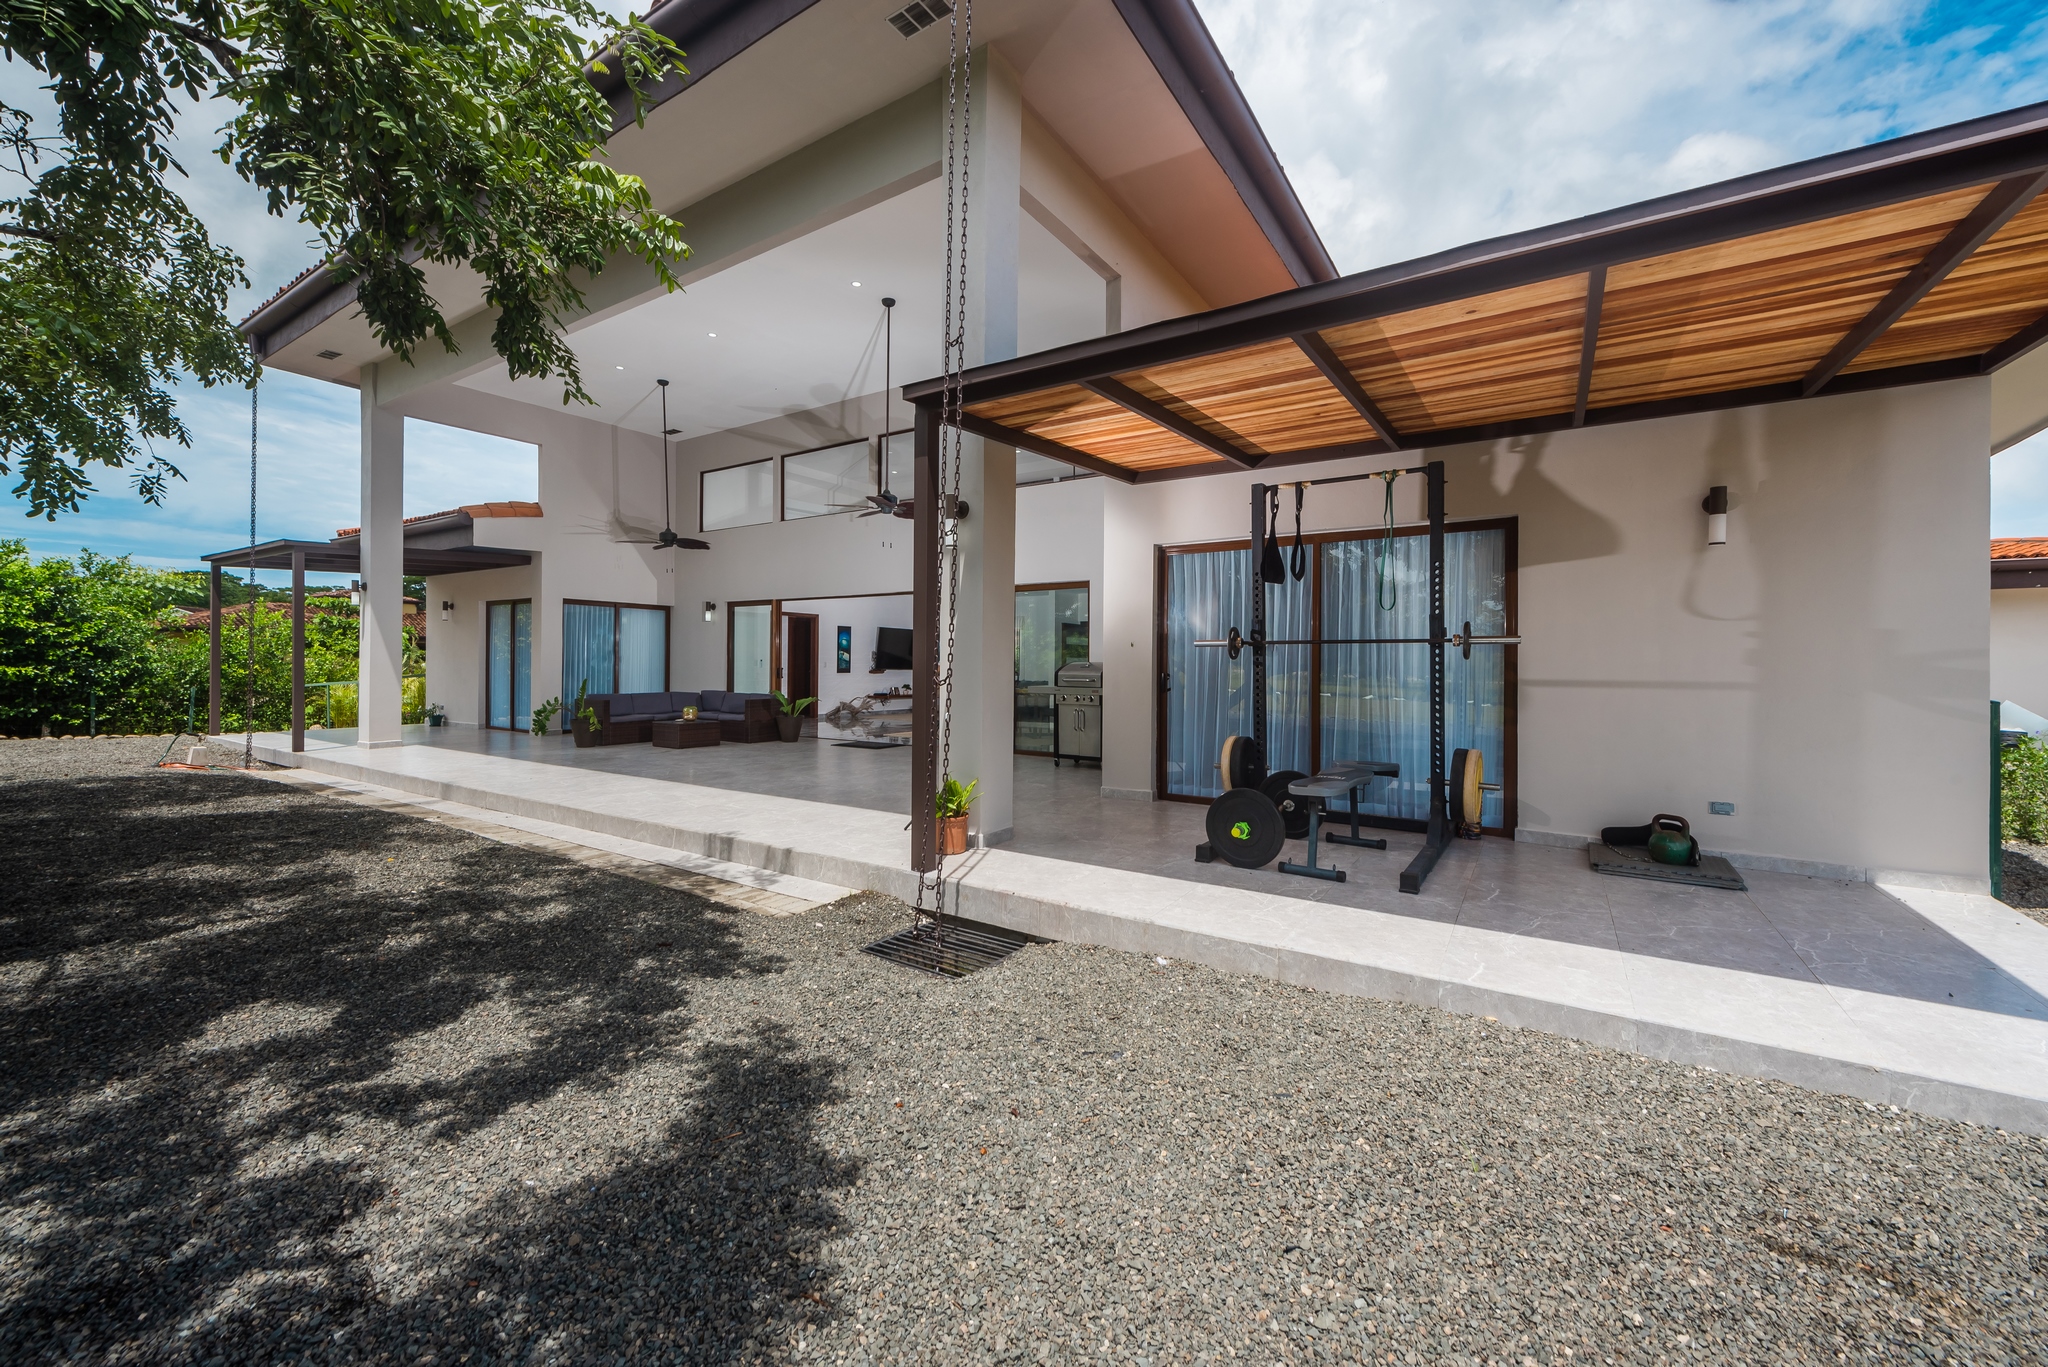 Casa Positive Vibration, one of the best beachfront homes for sale in Costa Rica